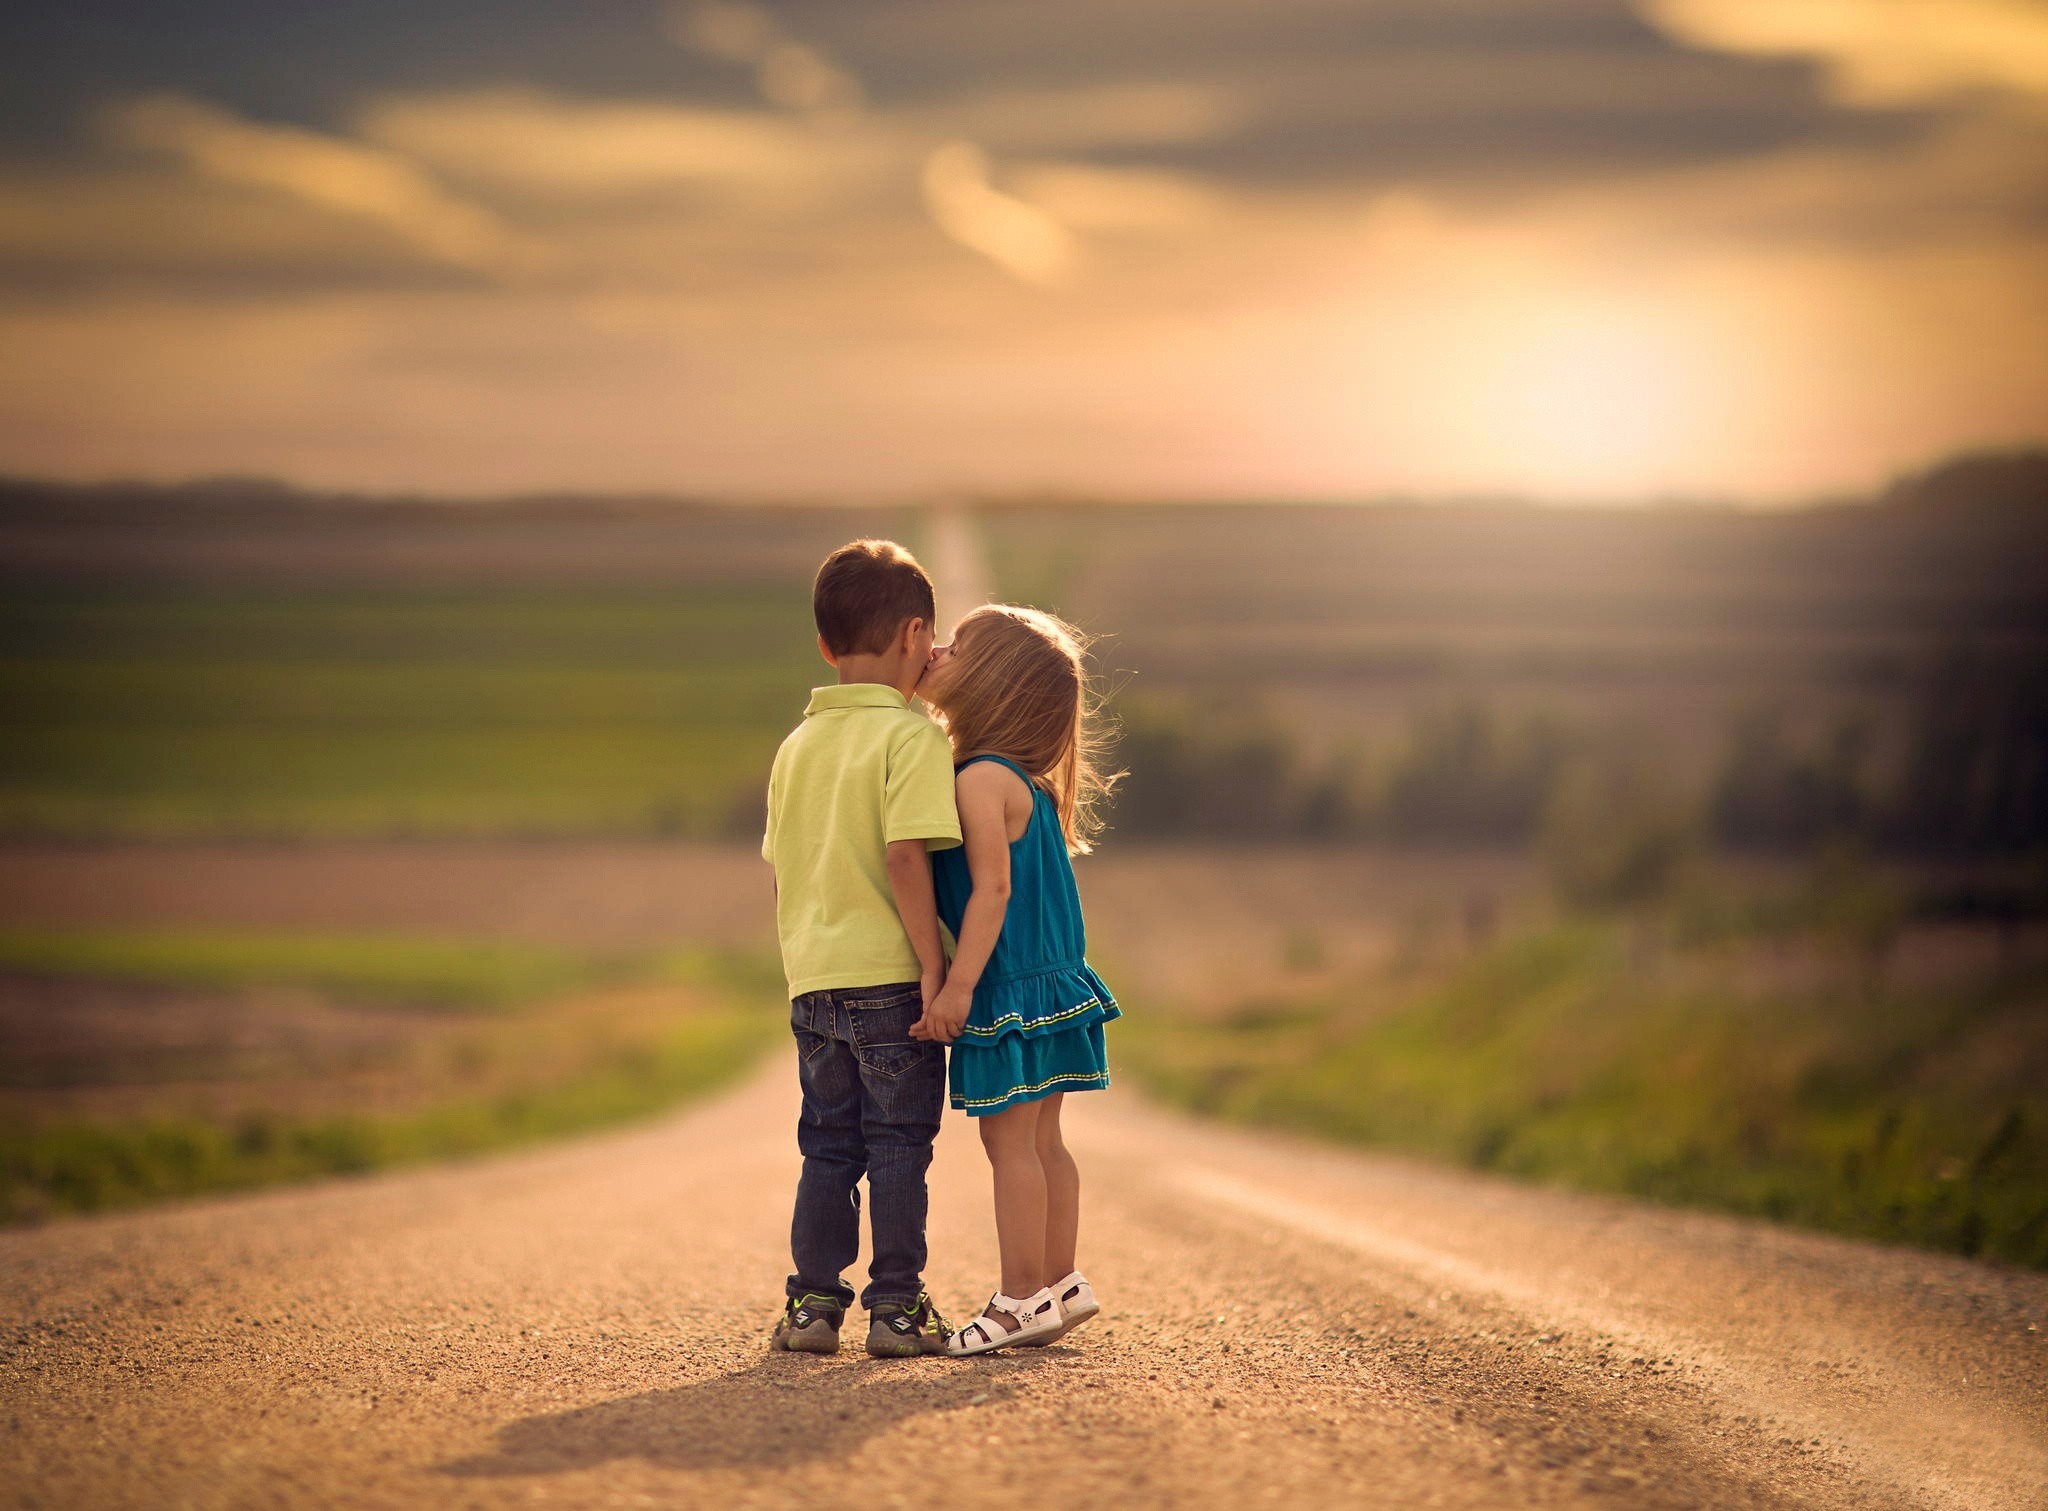 People 2048x1511 kissing children road holding hands Jake Olson outdoors